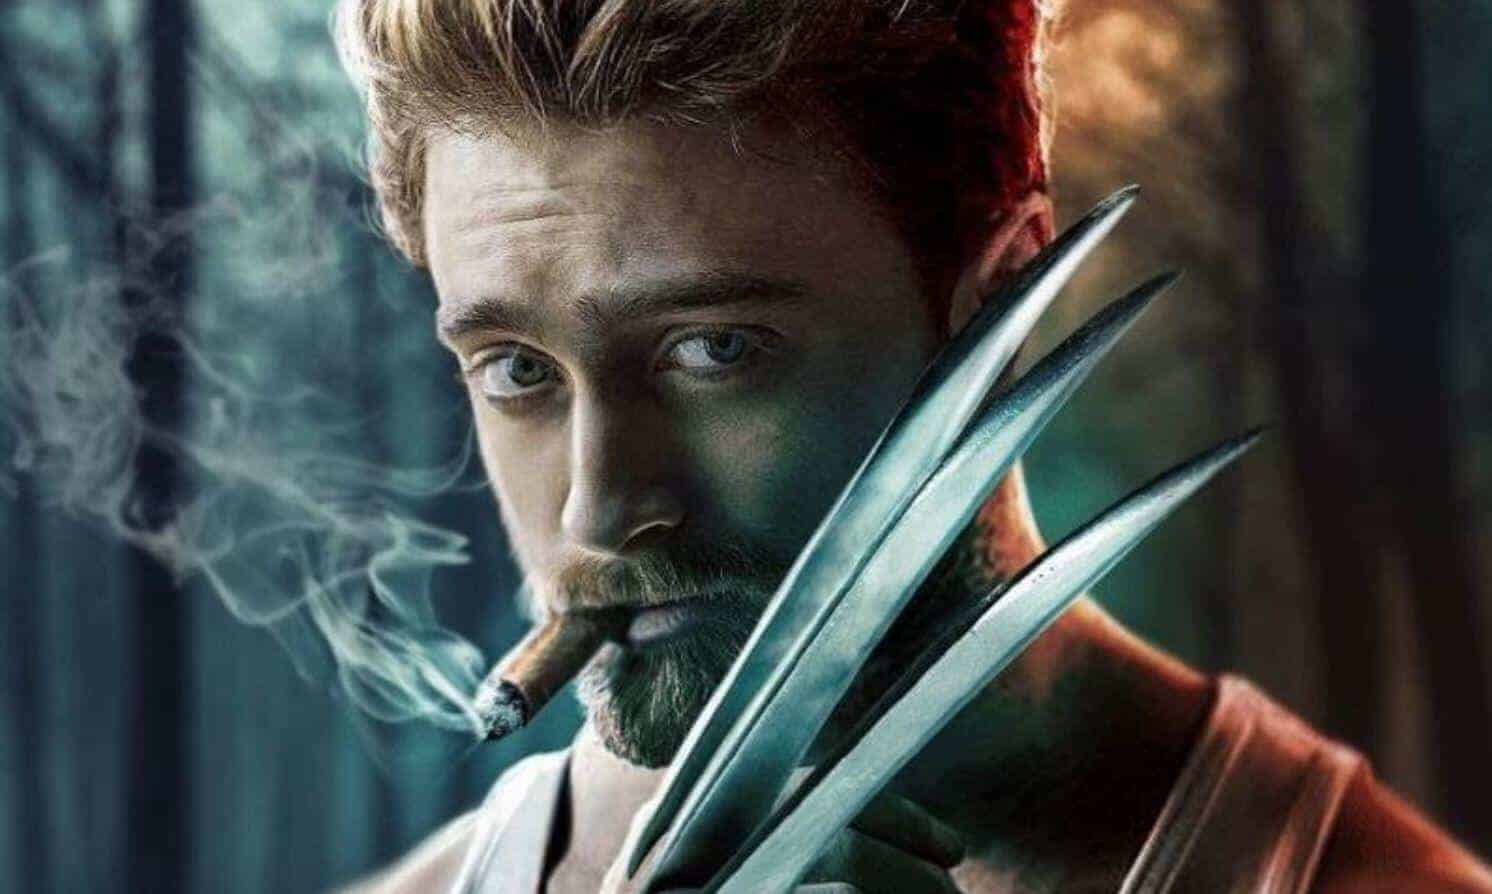 Will Daniel Radcliffe be the new Wolverine?